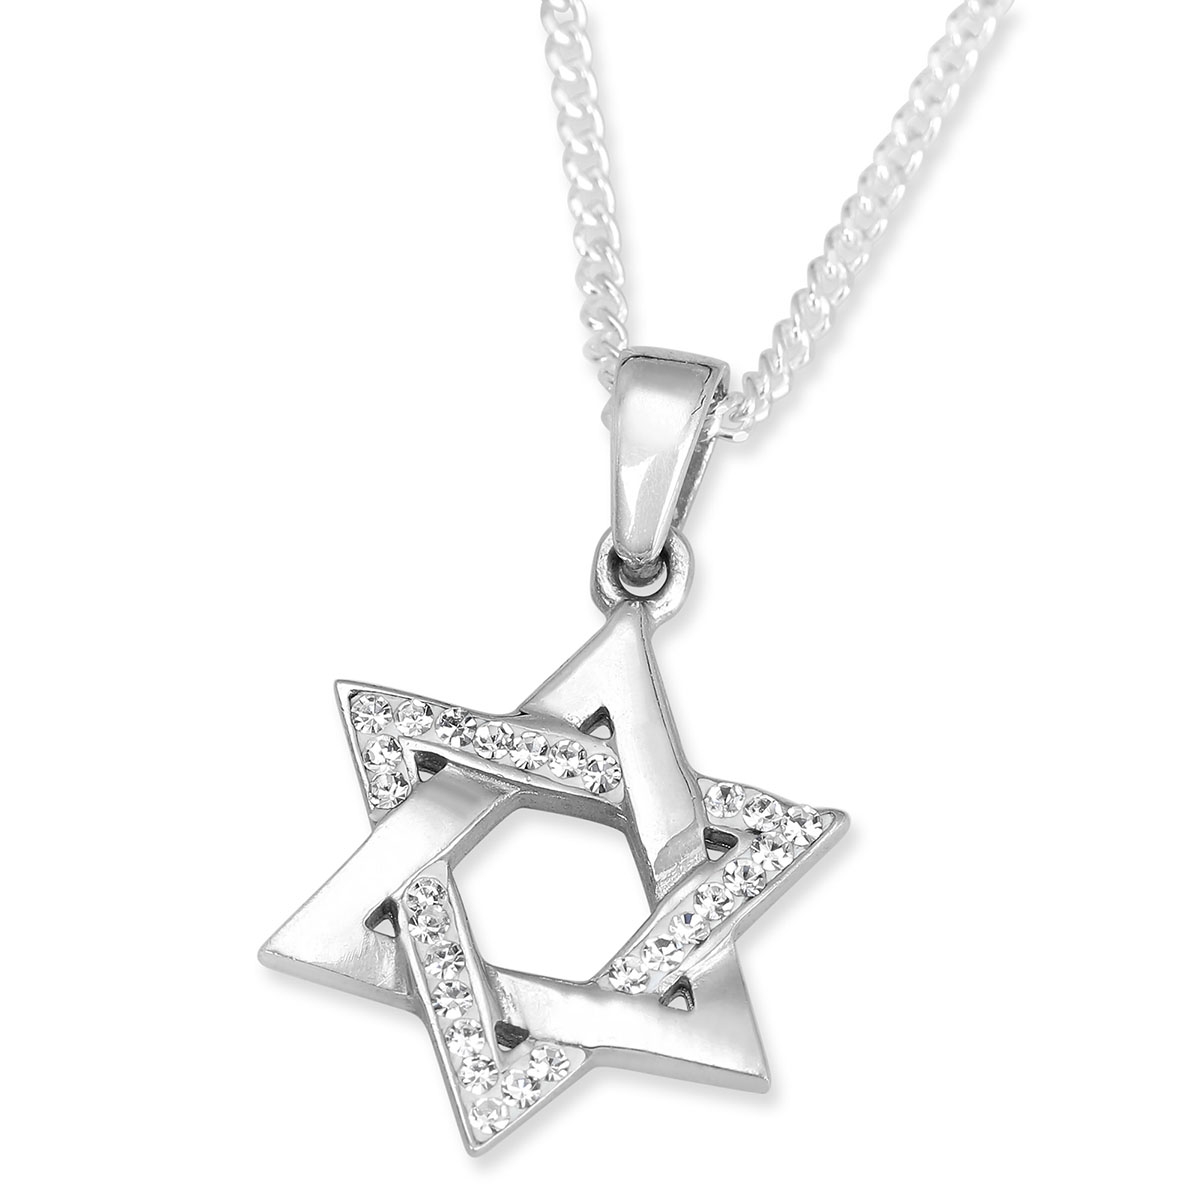 Elegant Sterling Silver and Zircon Star of David Pendant Necklace - 1